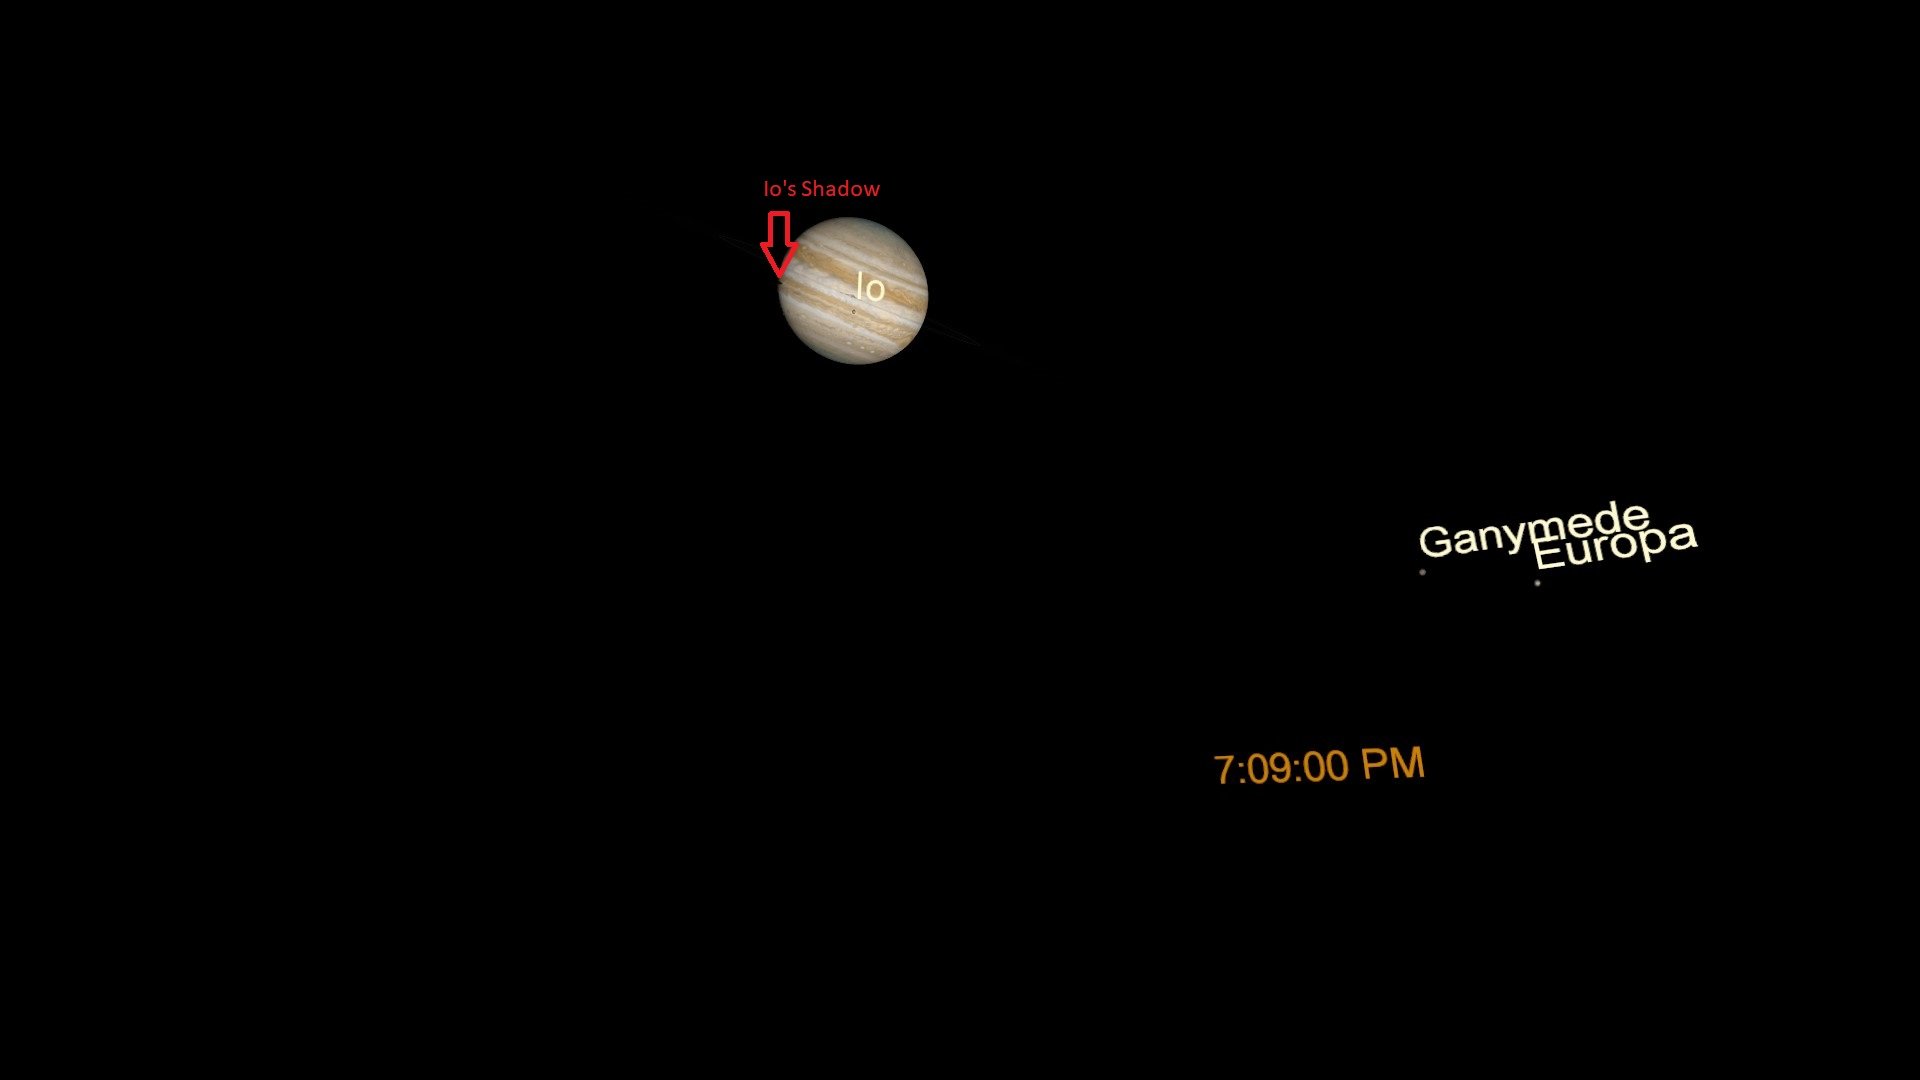 A close up view of Jupiter and three of its moons through a telescope. A red arrow marks the location of Io's shadow just visible on the left edge of the planet.